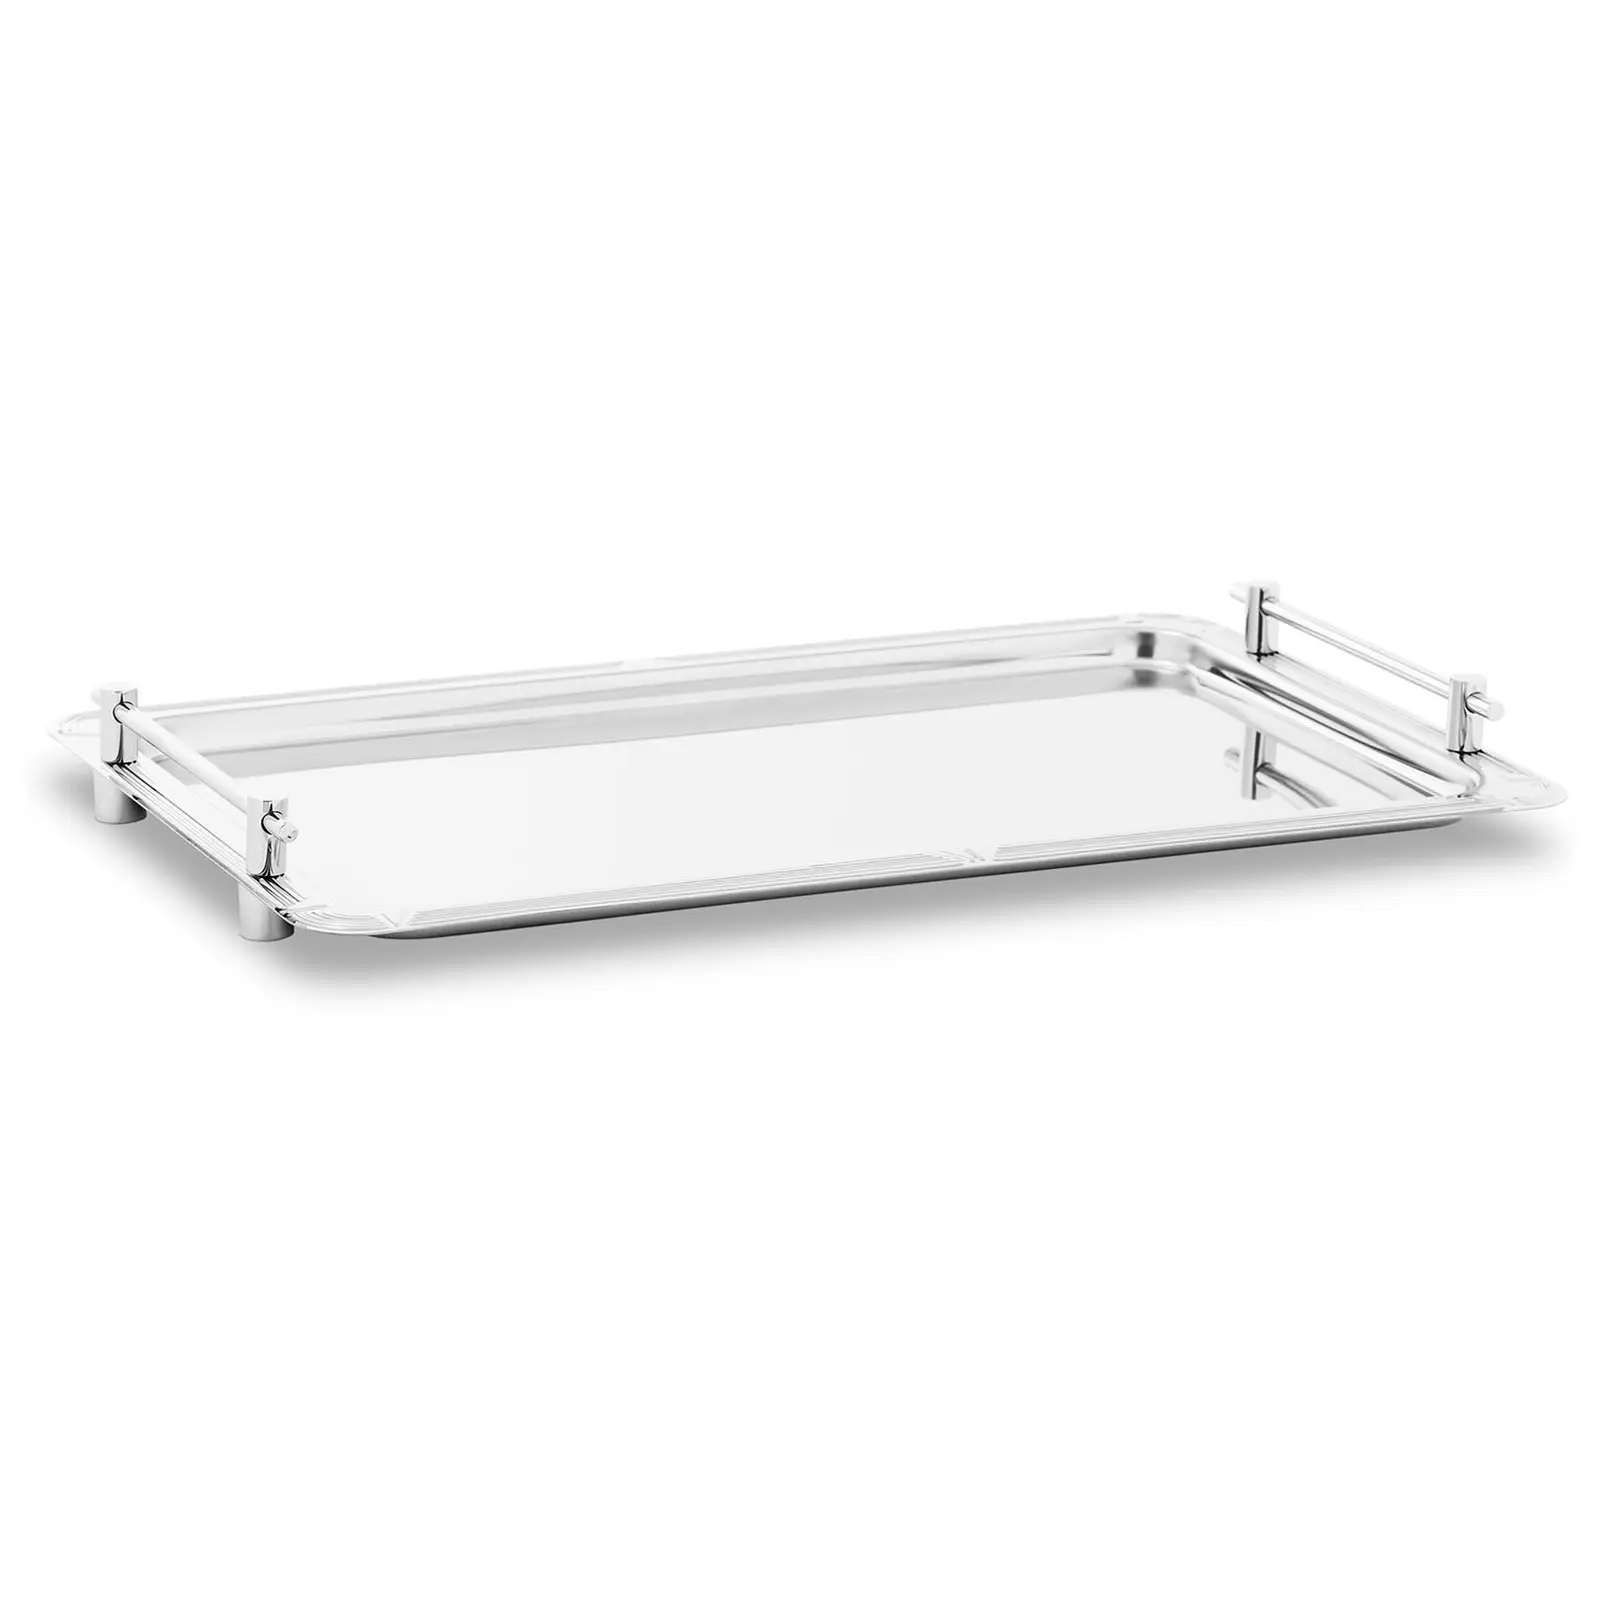 Stainless Steel Tray - GN 1/1 - stainless steel 18/10 - Royal Catering - 530 x 325 x 40 mm